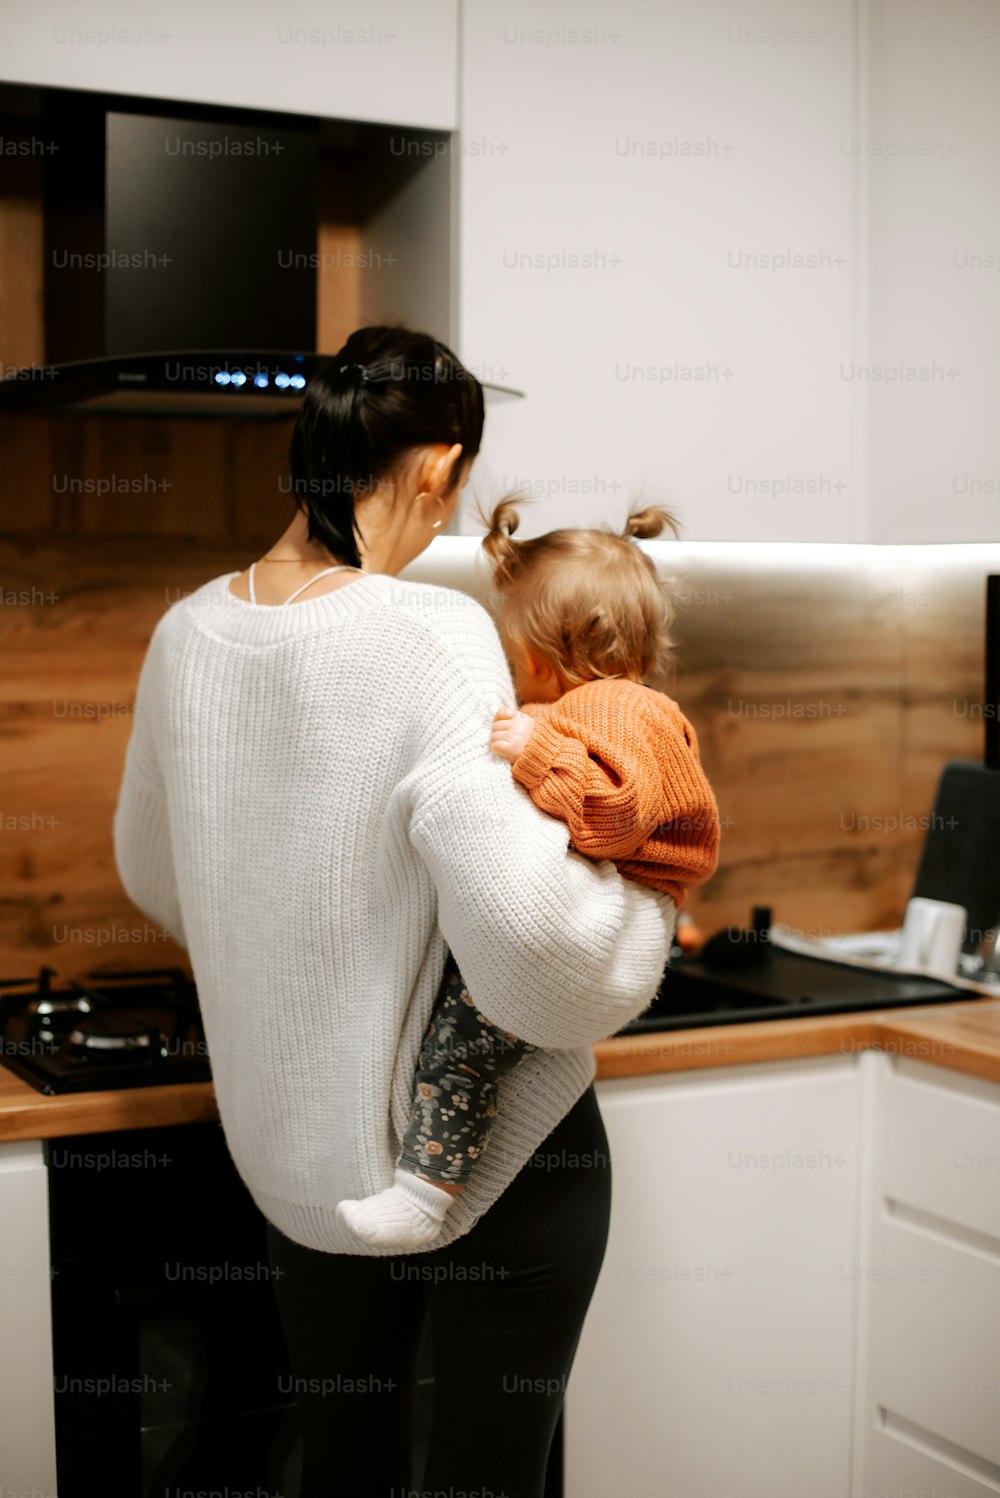 a woman holding a child in a kitchen